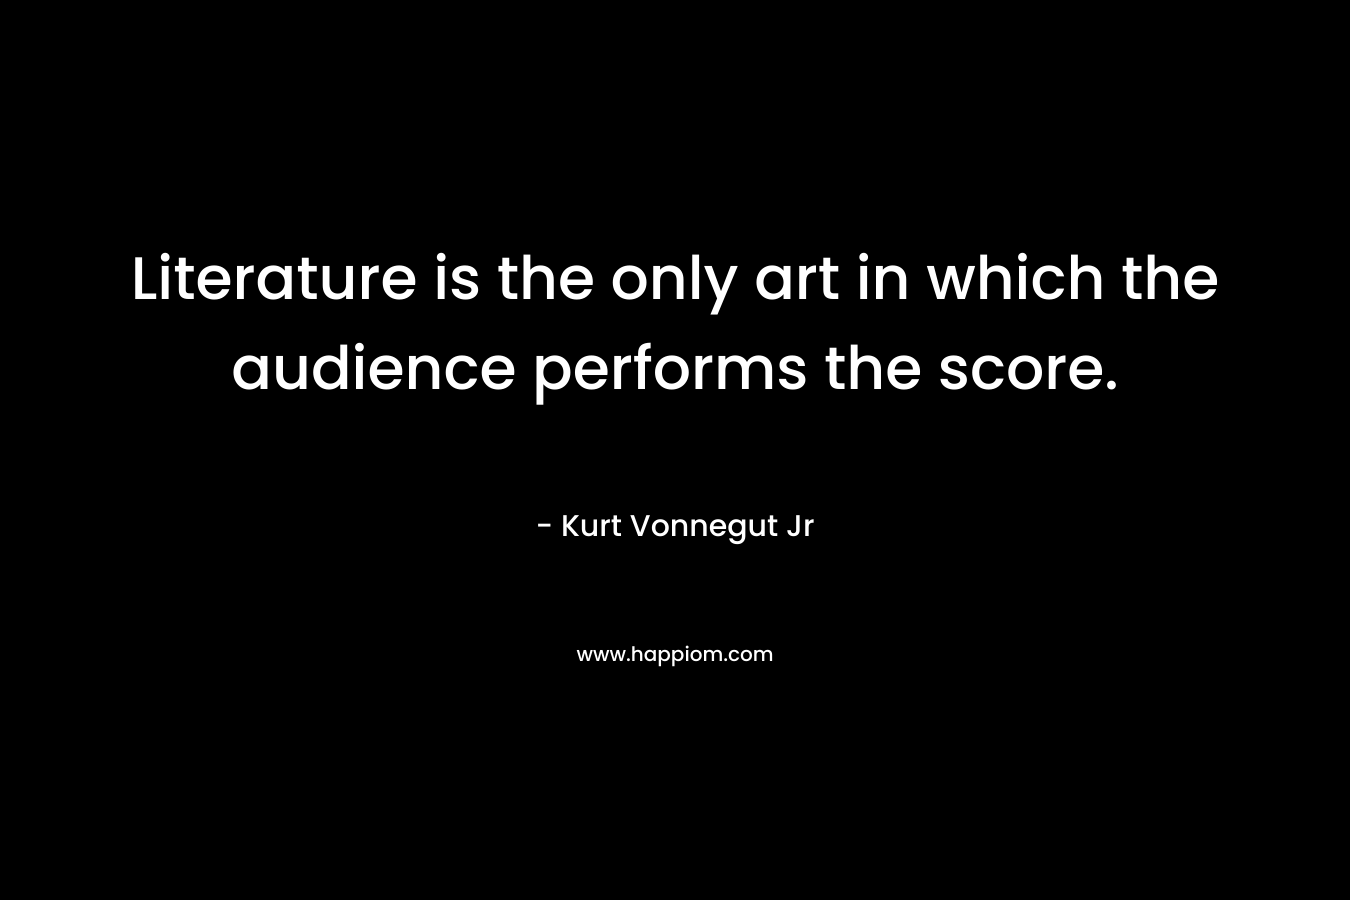 Literature is the only art in which the audience performs the score. – Kurt Vonnegut Jr